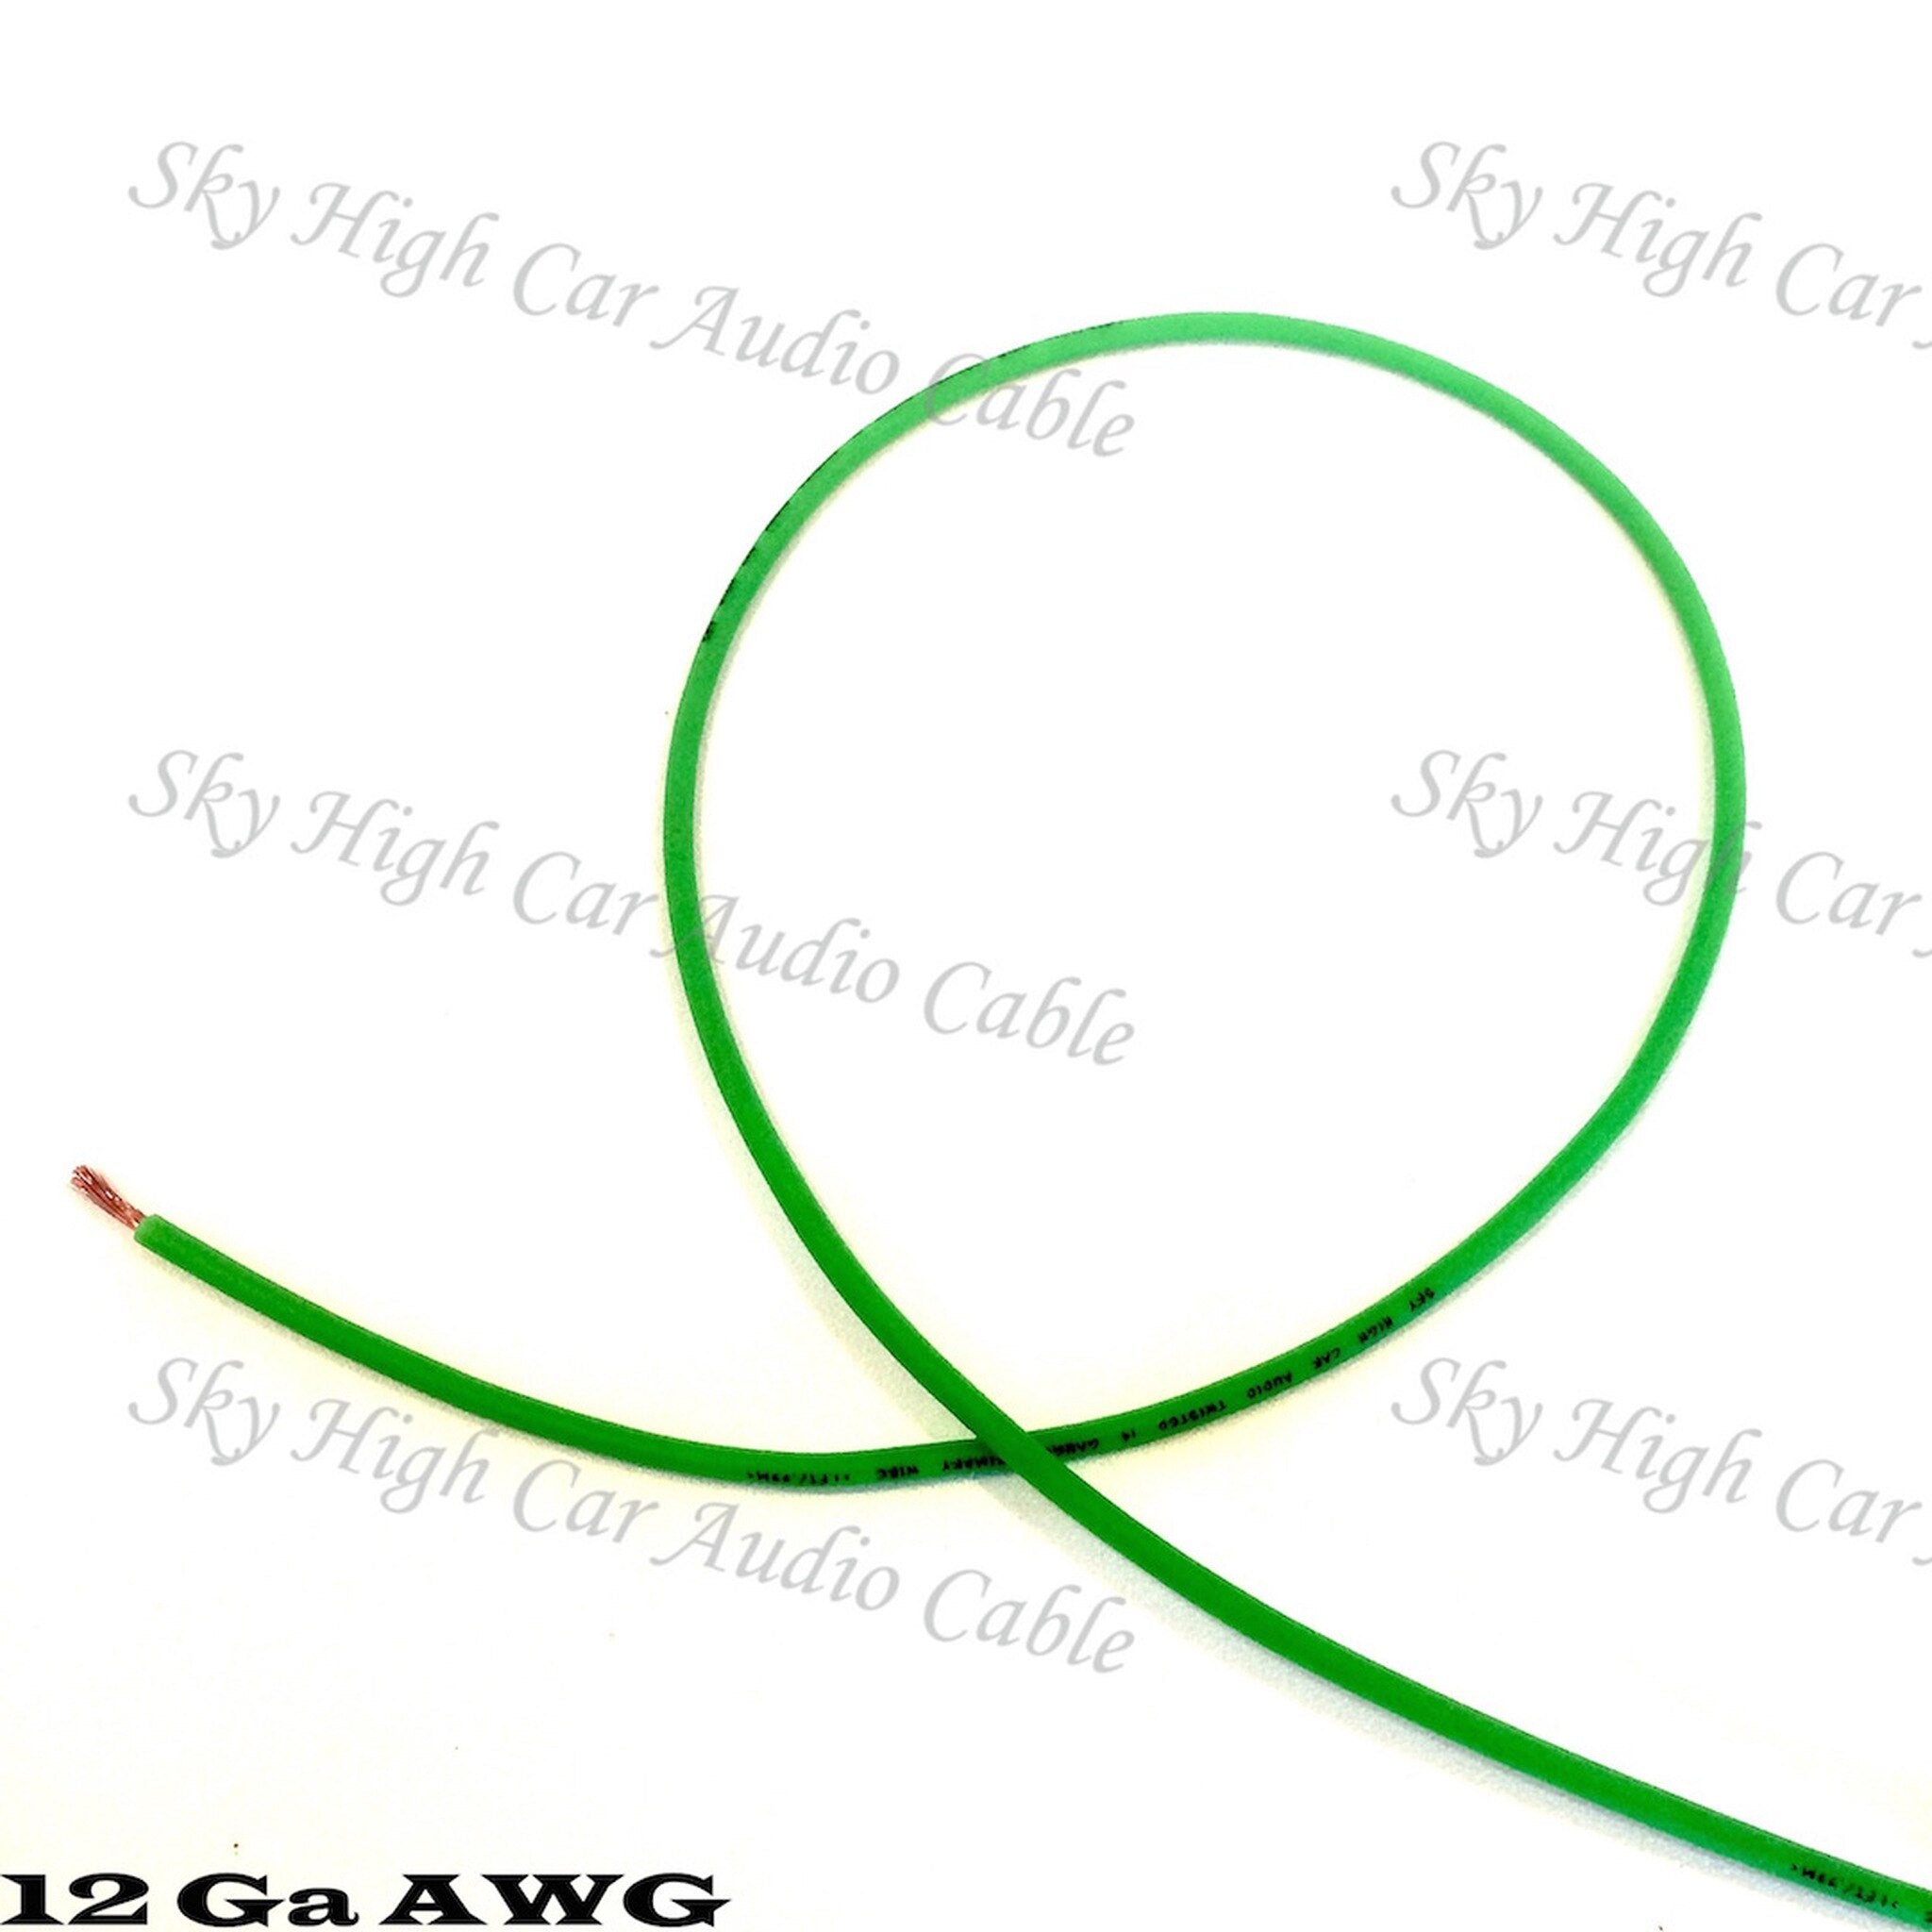 Sky High Car Audio OFC 12 Gauge Primary Wire 25ft-100ft